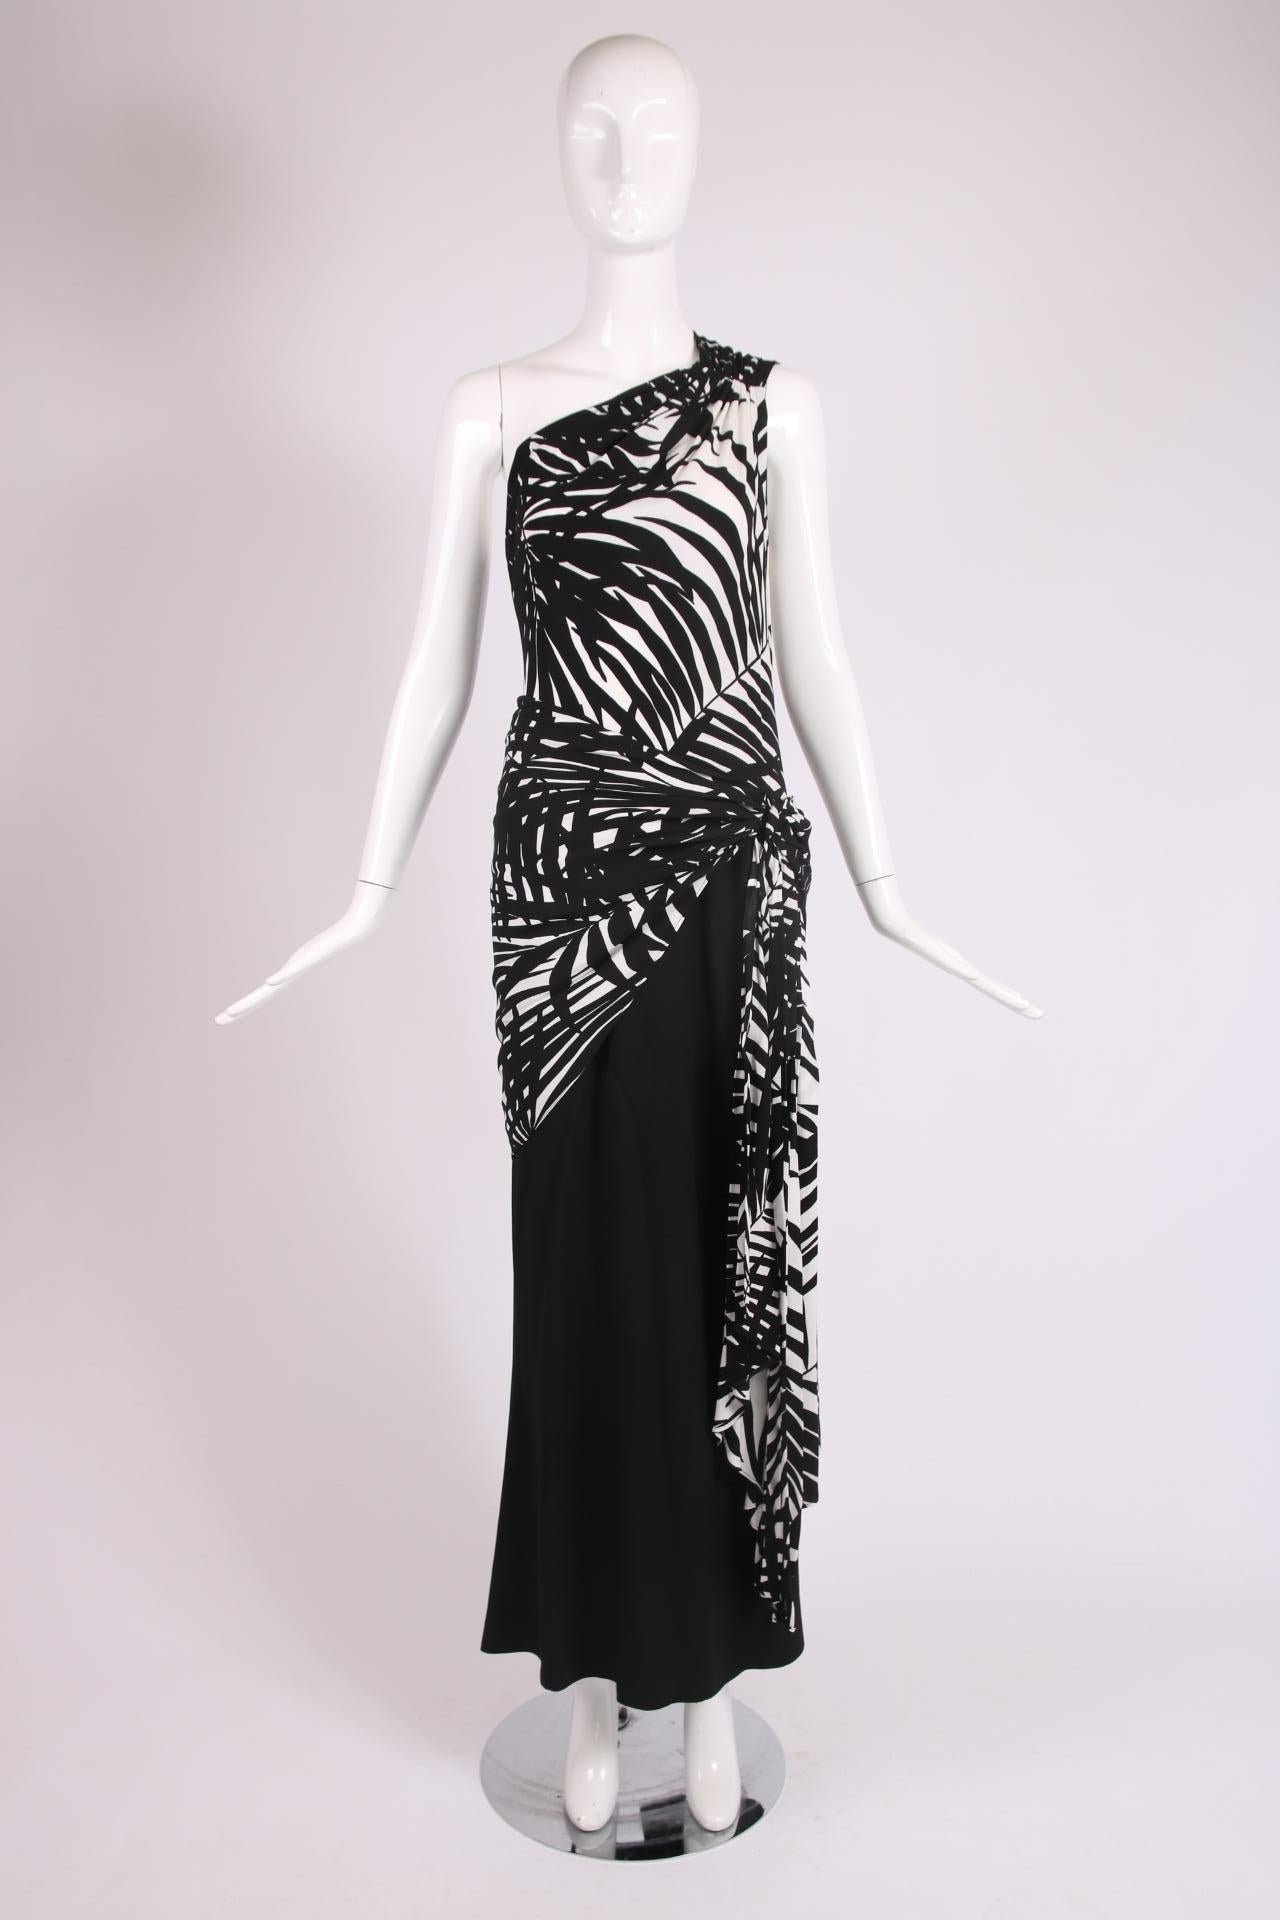 Yves Saint Laurent black and white leaf print silk single shoulder gown with size zipper, fabric that hangs at the side and a black skirt. No fabric tag but feels like some kind of jersey. In excellent condition - size tag 40. Please see